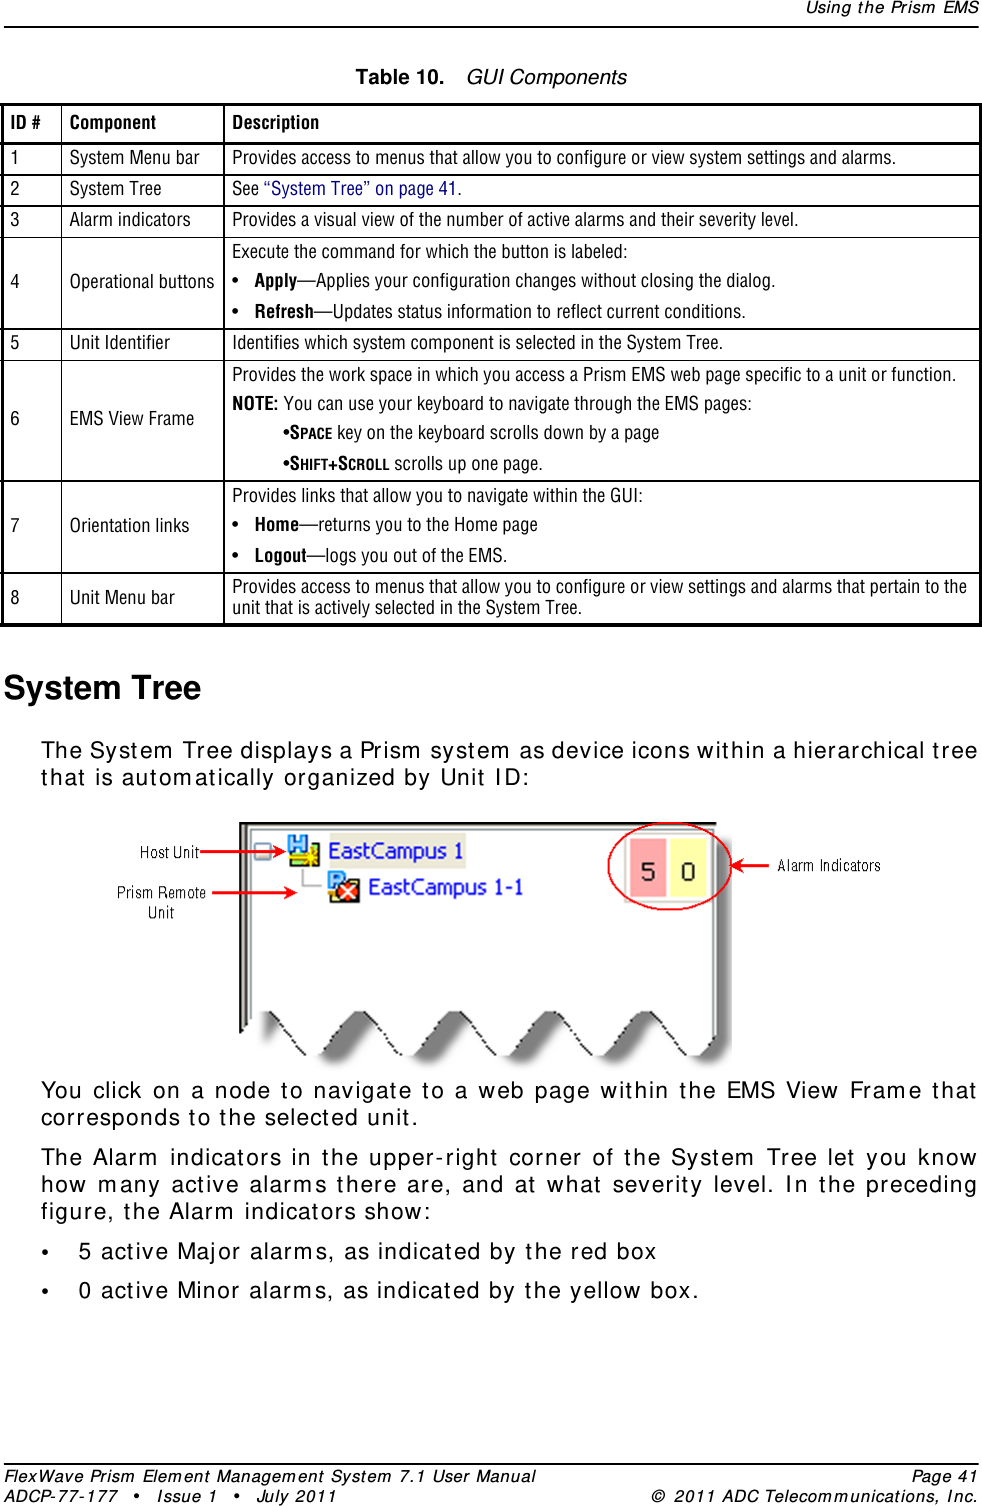 Using the Prism EMSFlexWave Prism Element Management System 7.1 User Manual Page 41ADCP-77-177 • Issue 1 • July 2011 © 2011 ADC Telecommunications, Inc.System TreeThe System Tree displays a Prism system as device icons within a hierarchical tree that is automatically organized by Unit ID:You click on a node to navigate to a web page within the EMS View Frame that corresponds to the selected unit.The Alarm indicators in the upper-right corner of the System Tree let you know how many active alarms there are, and at what severity level. In the preceding figure, the Alarm indicators show:•5 active Major alarms, as indicated by the red box•0 active Minor alarms, as indicated by the yellow box.Table 10. GUI ComponentsID # Component Description1System Menu bar Provides access to menus that allow you to configure or view system settings and alarms.2System Tree See “System Tree” on page 41.3Alarm indicators Provides a visual view of the number of active alarms and their severity level.4Operational buttonsExecute the command for which the button is labeled:•Apply—Applies your configuration changes without closing the dialog.•Refresh—Updates status information to reflect current conditions.5Unit Identifier Identifies which system component is selected in the System Tree.6EMS View FrameProvides the work space in which you access a Prism EMS web page specific to a unit or function.NOTE: You can use your keyboard to navigate through the EMS pages:•SPACE key on the keyboard scrolls down by a page•SHIFT+SCROLL scrolls up one page.7Orientation linksProvides links that allow you to navigate within the GUI:•Home—returns you to the Home page•Logout—logs you out of the EMS.8Unit Menu bar Provides access to menus that allow you to configure or view settings and alarms that pertain to the unit that is actively selected in the System Tree.